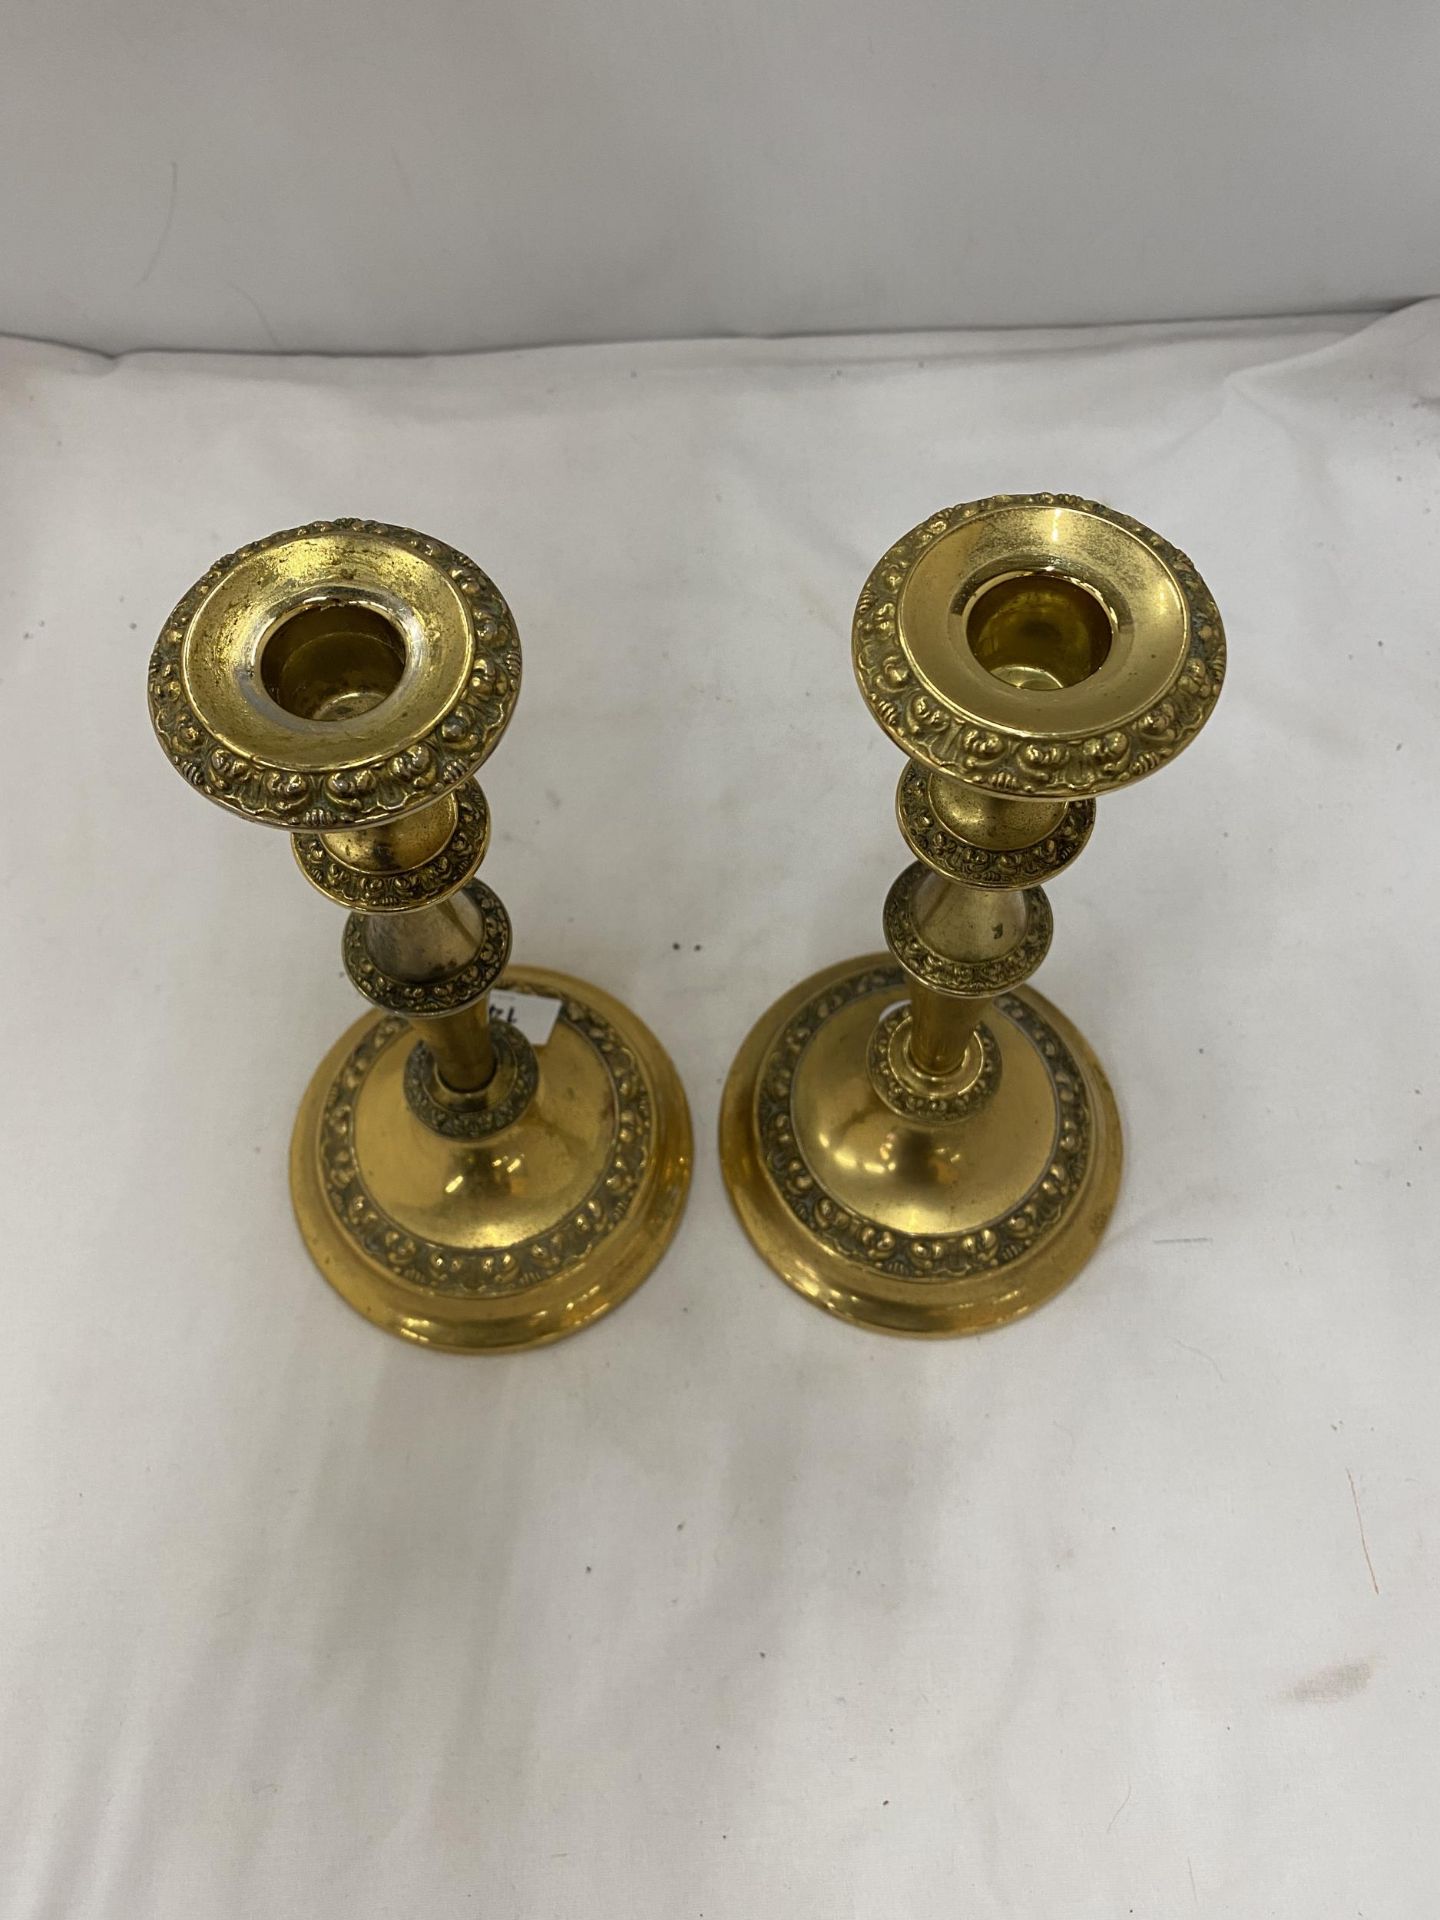 TWO LARGE BRASS CANDLESTICKS 27 CM - Image 2 of 3